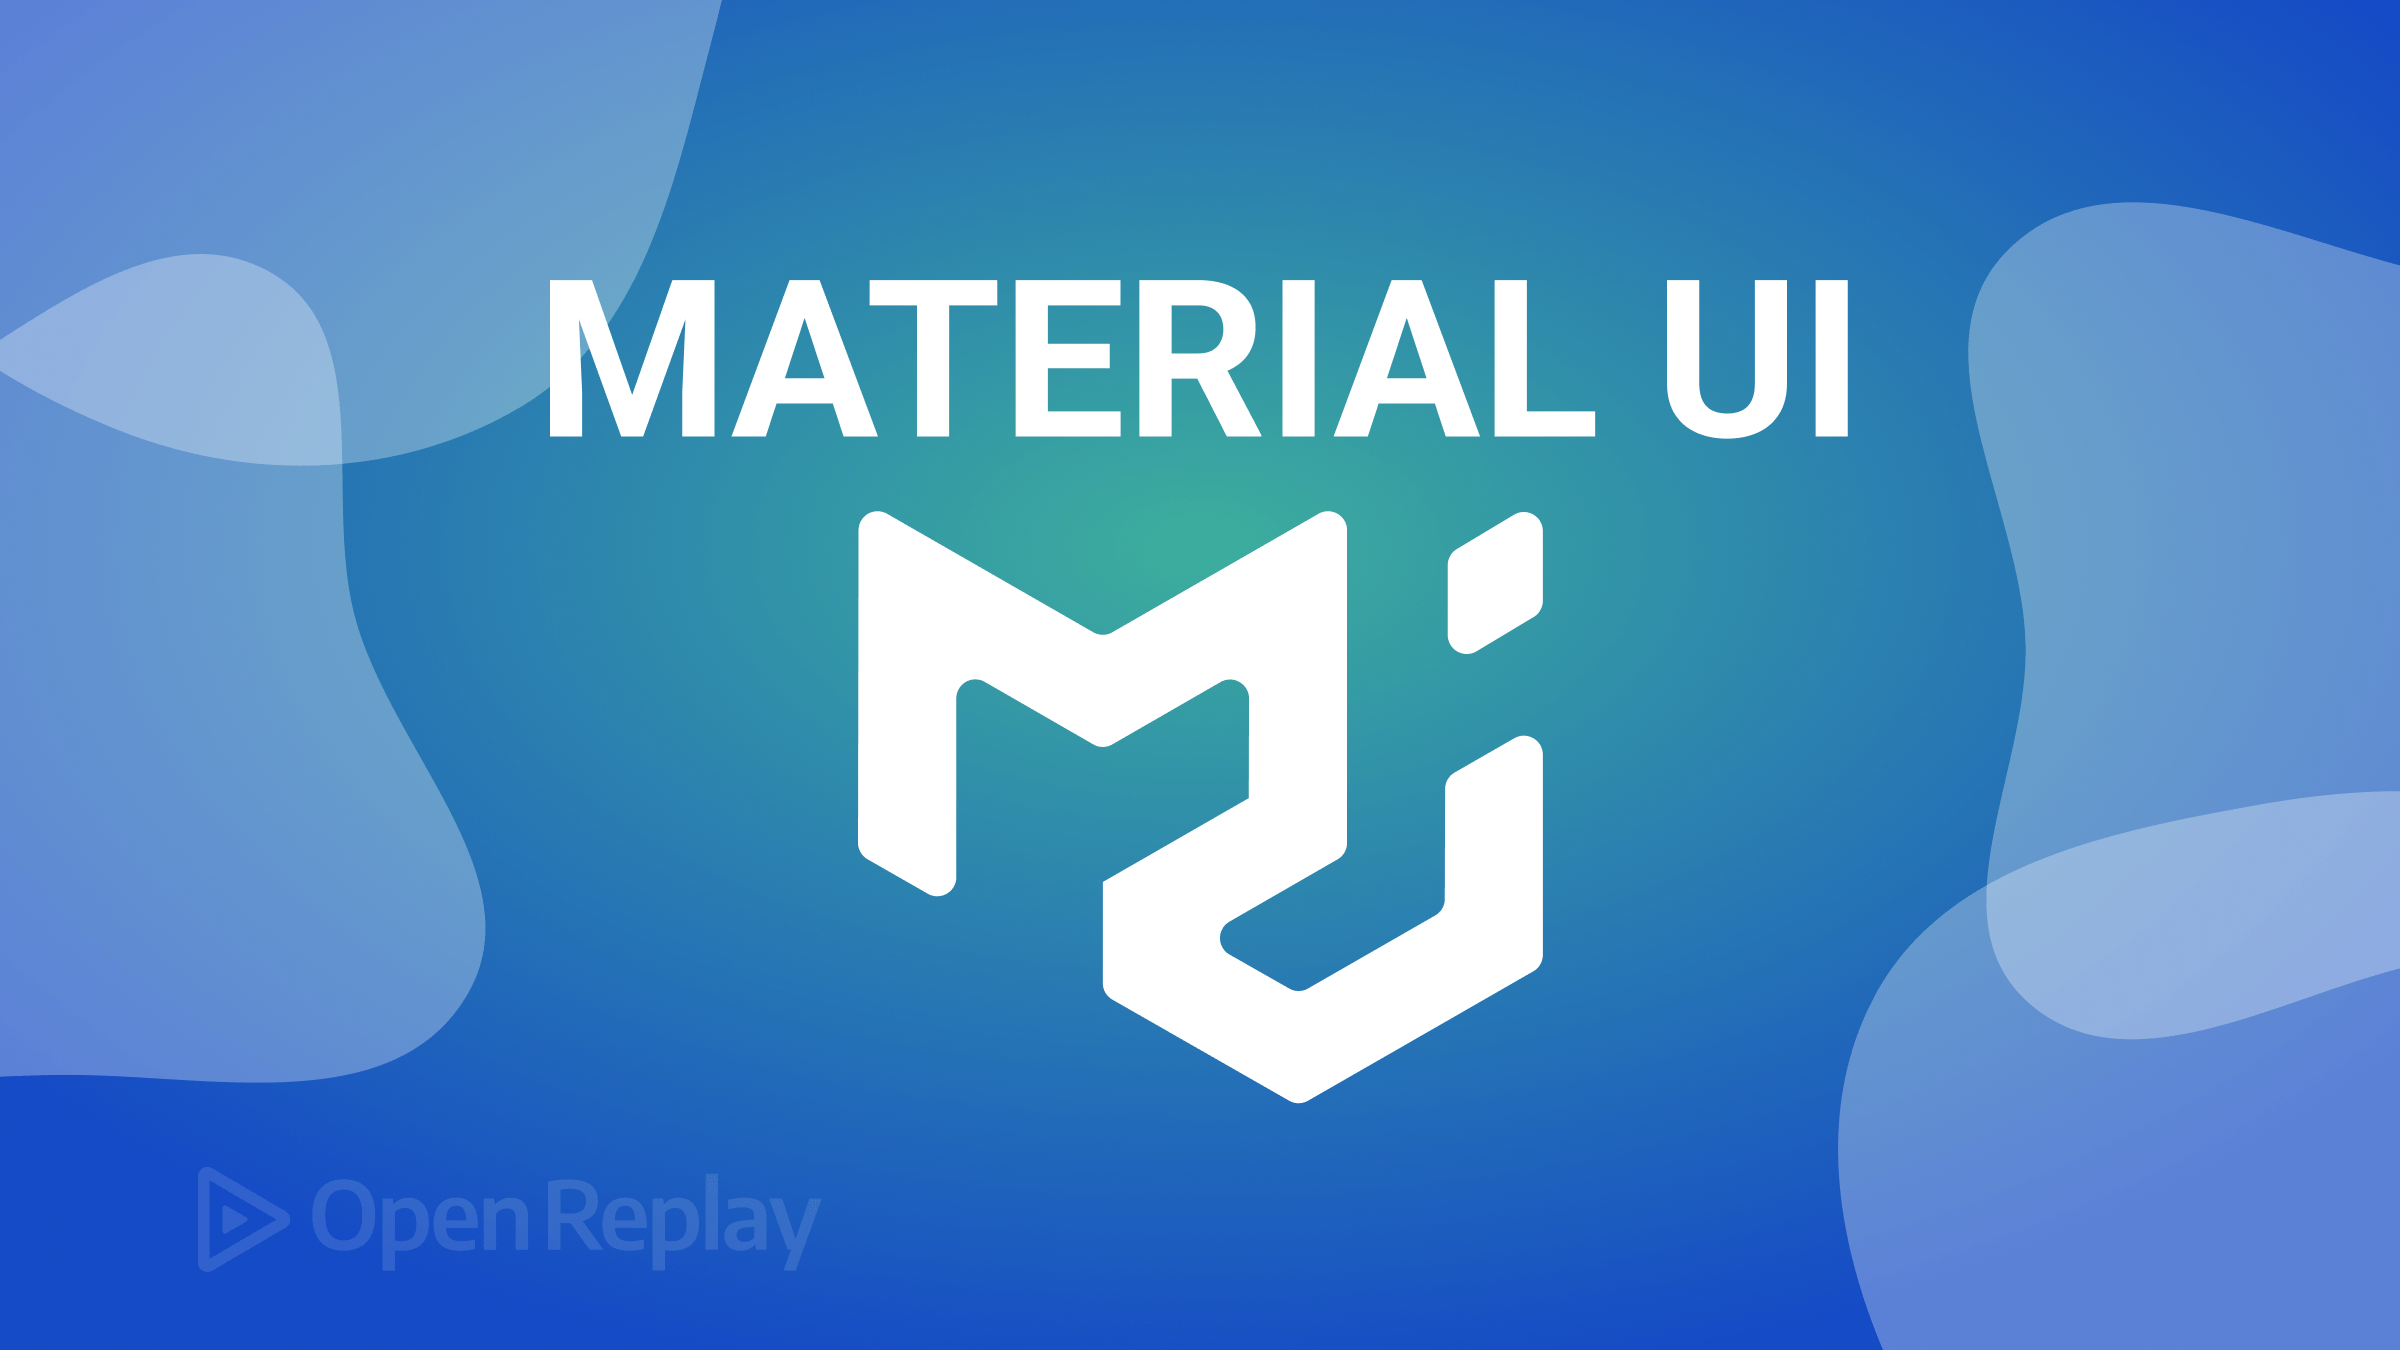 Why should you use Material UI?